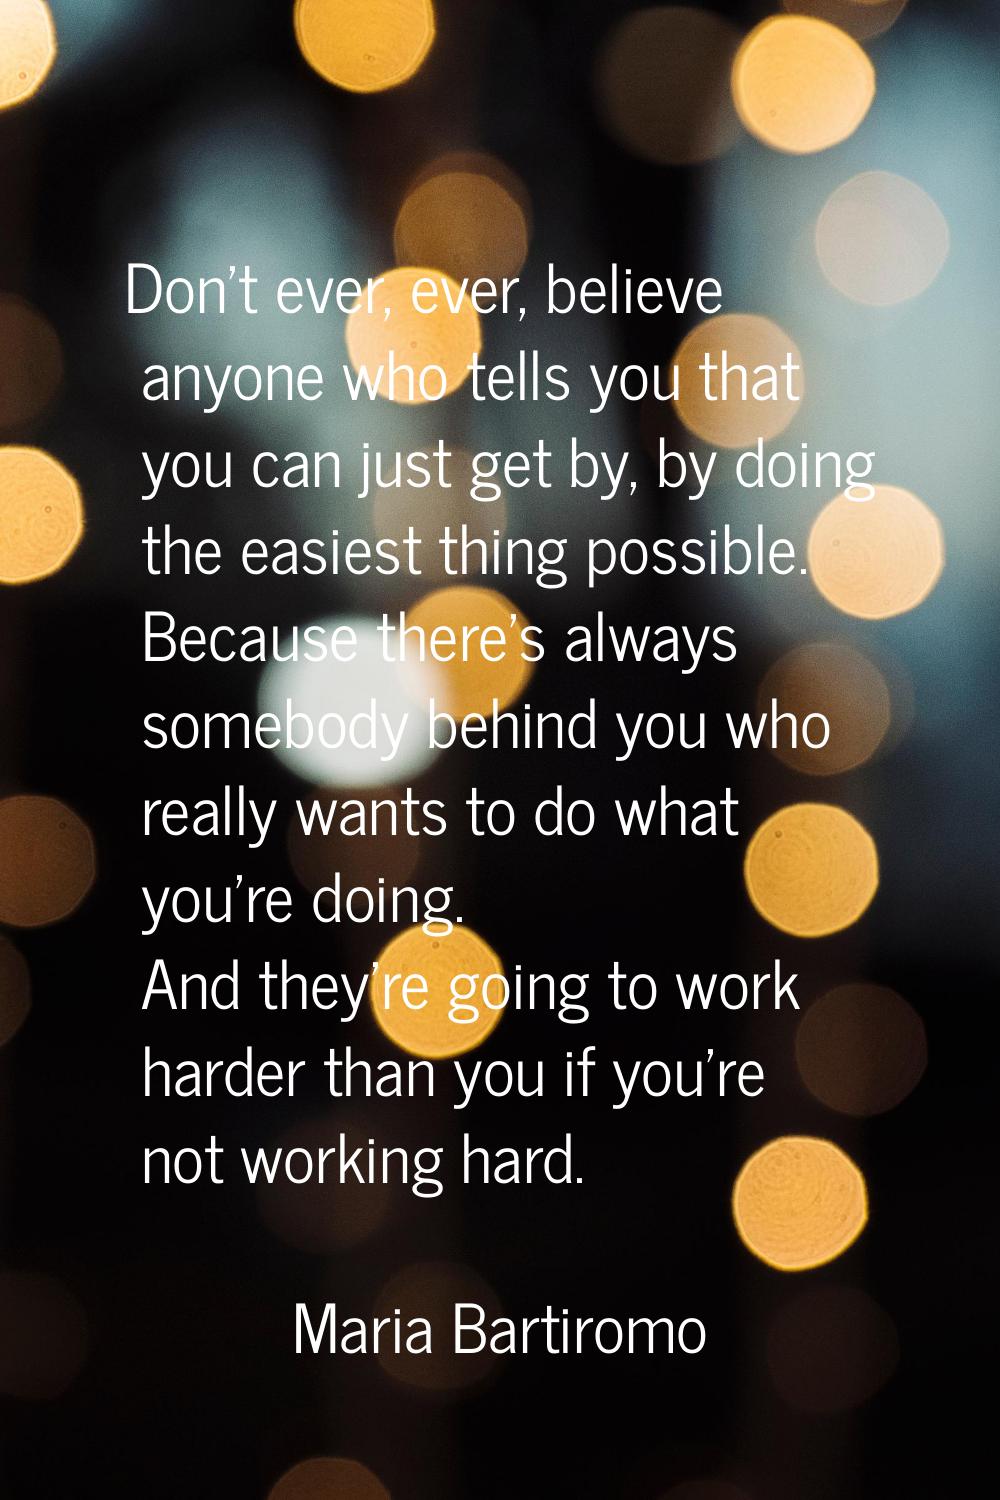 Don't ever, ever, believe anyone who tells you that you can just get by, by doing the easiest thing